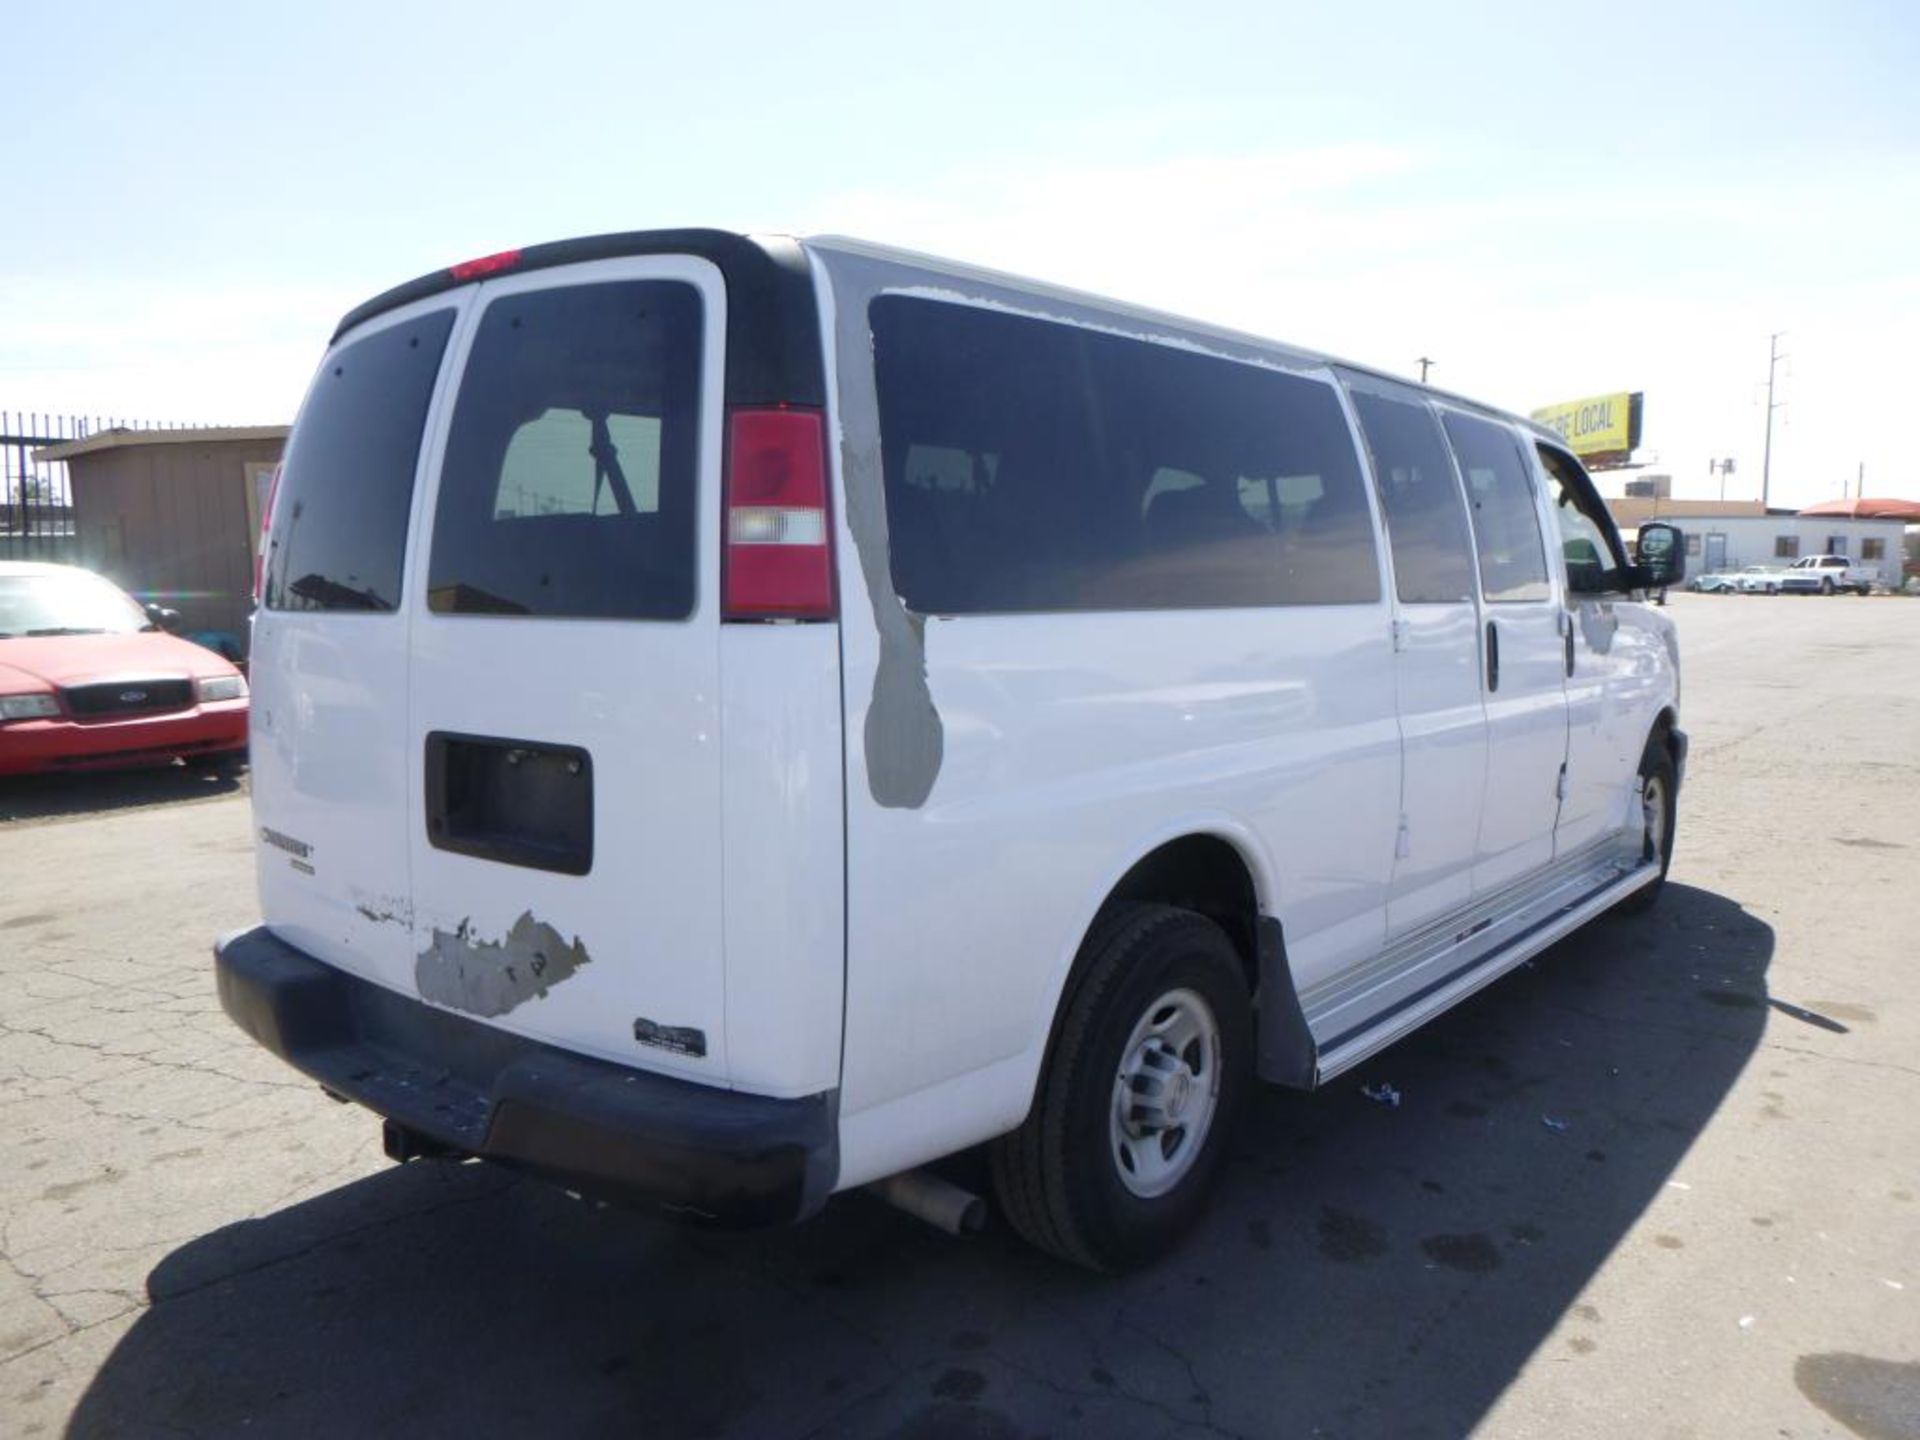 2008 Chevrolet Express - Image 3 of 14